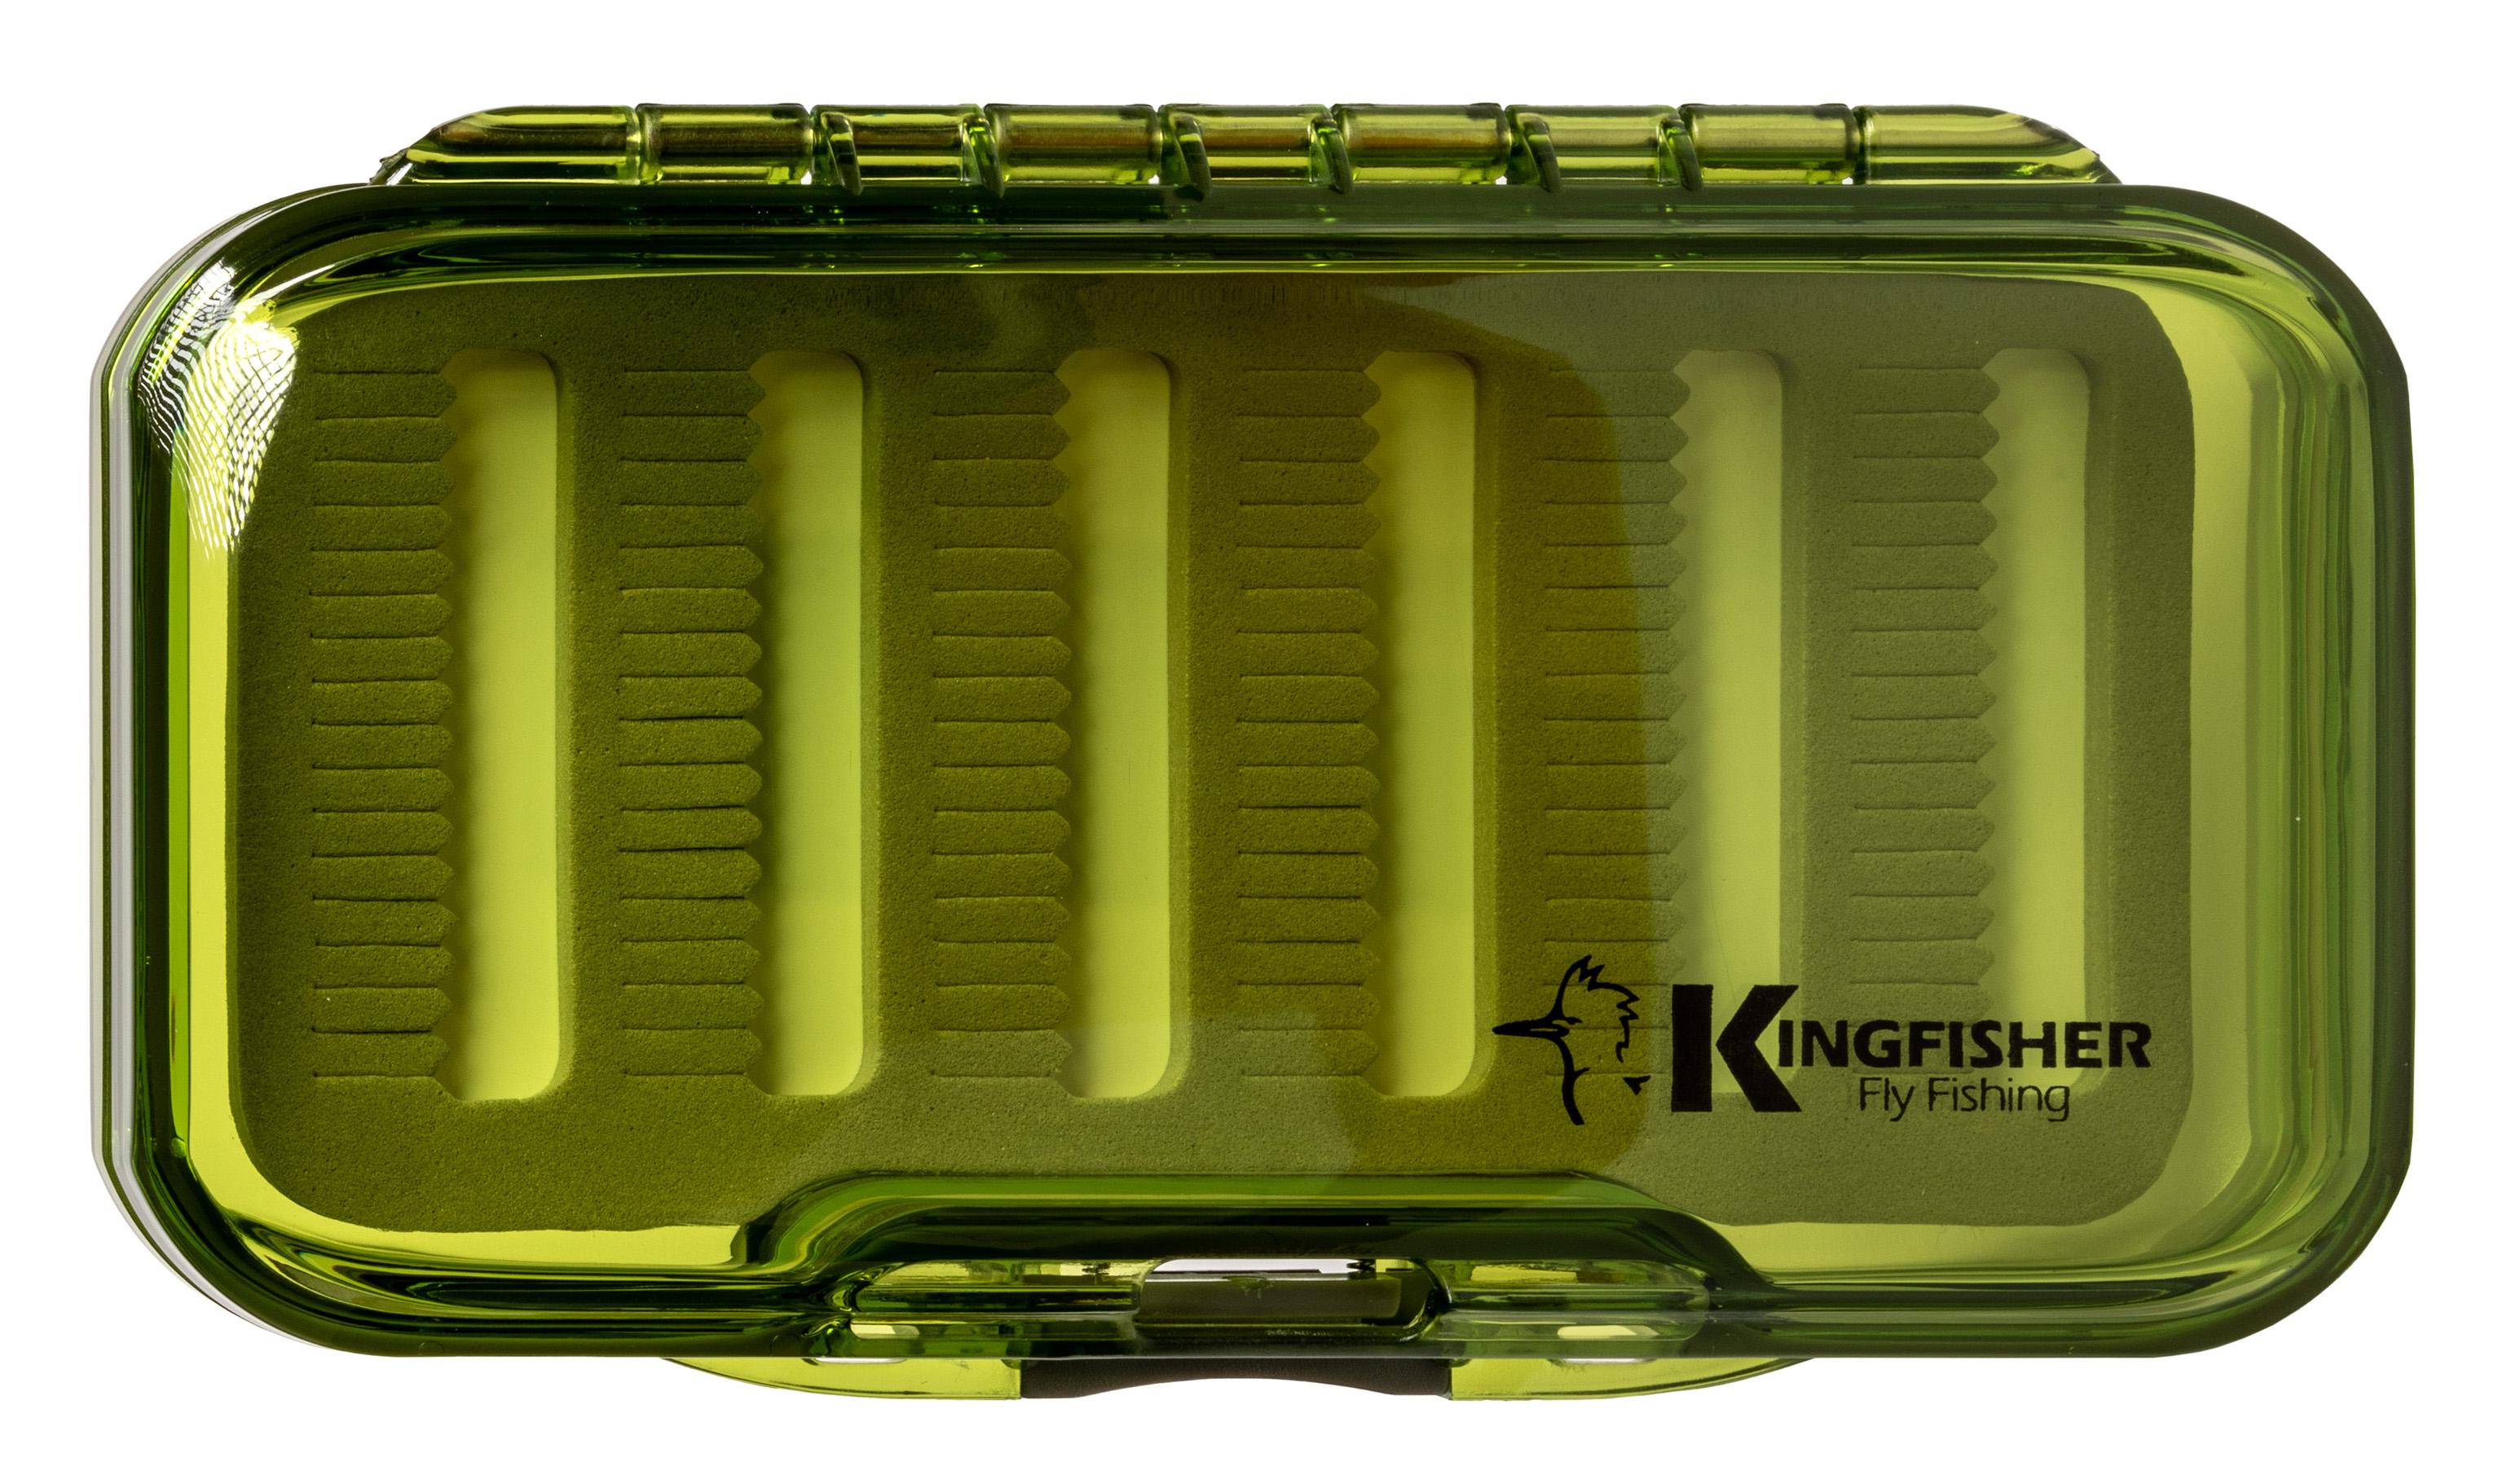 Kingfisher - Kingfisher Fly Fishing Collection Fly Boxes Clear Fly Fishing  Box Extra Large Capacity Slit Foam Fishing Competition Hook Tackle Boxes, 2  Pack